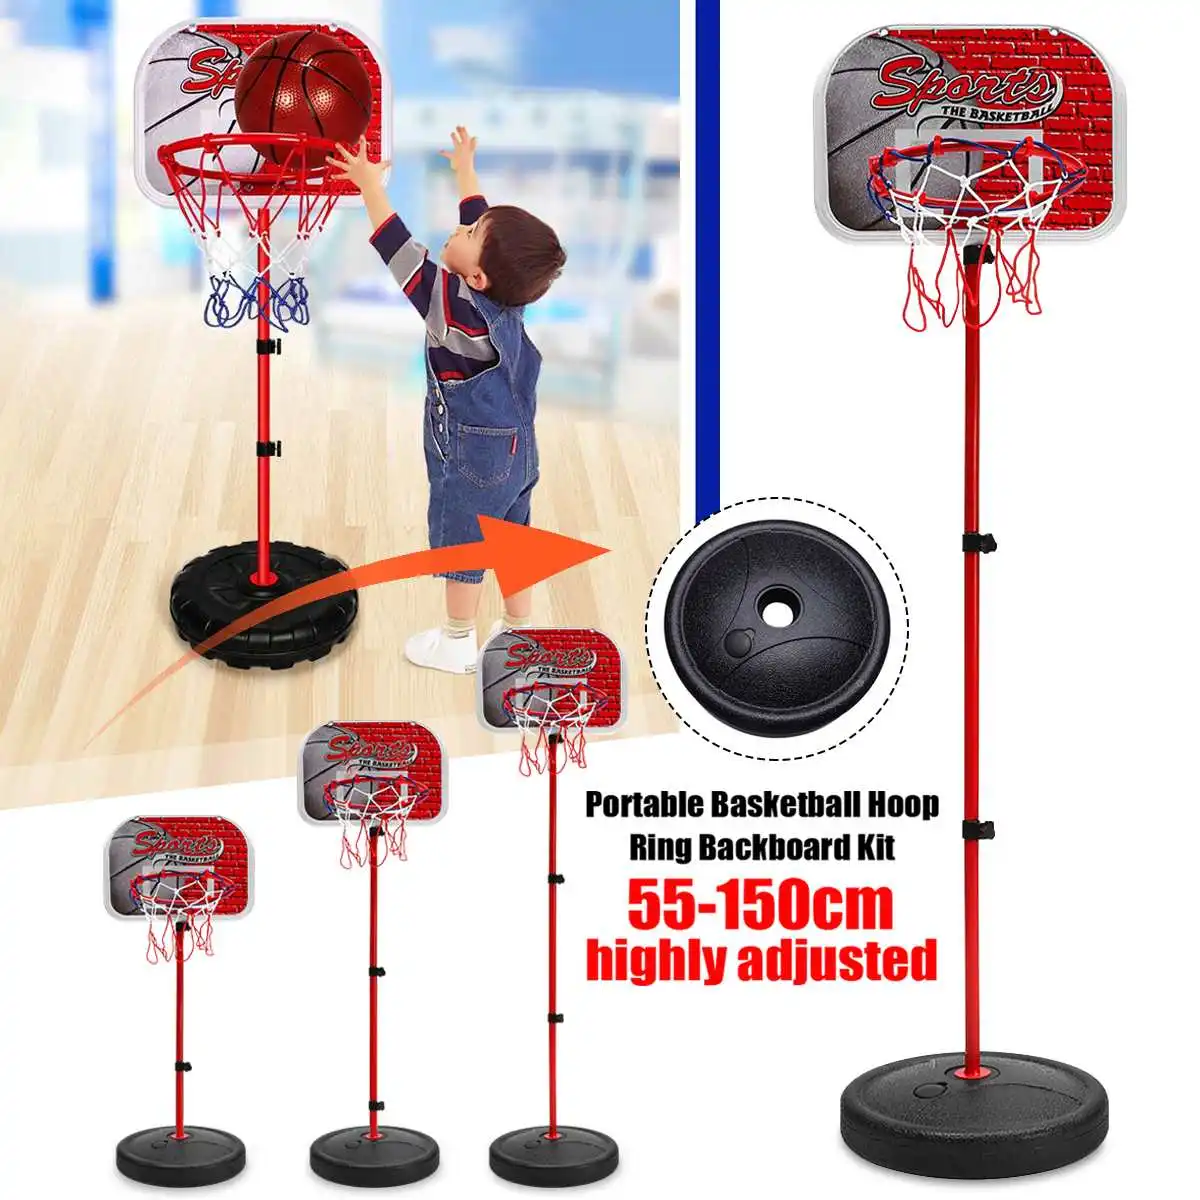 Vbest life Hanging Mini Basketball Board Kids Indoor Basketball Hoop Play Set Basketball Netball Hoop pour Indoor Outdoor Kids Game Toy with Air Pump 